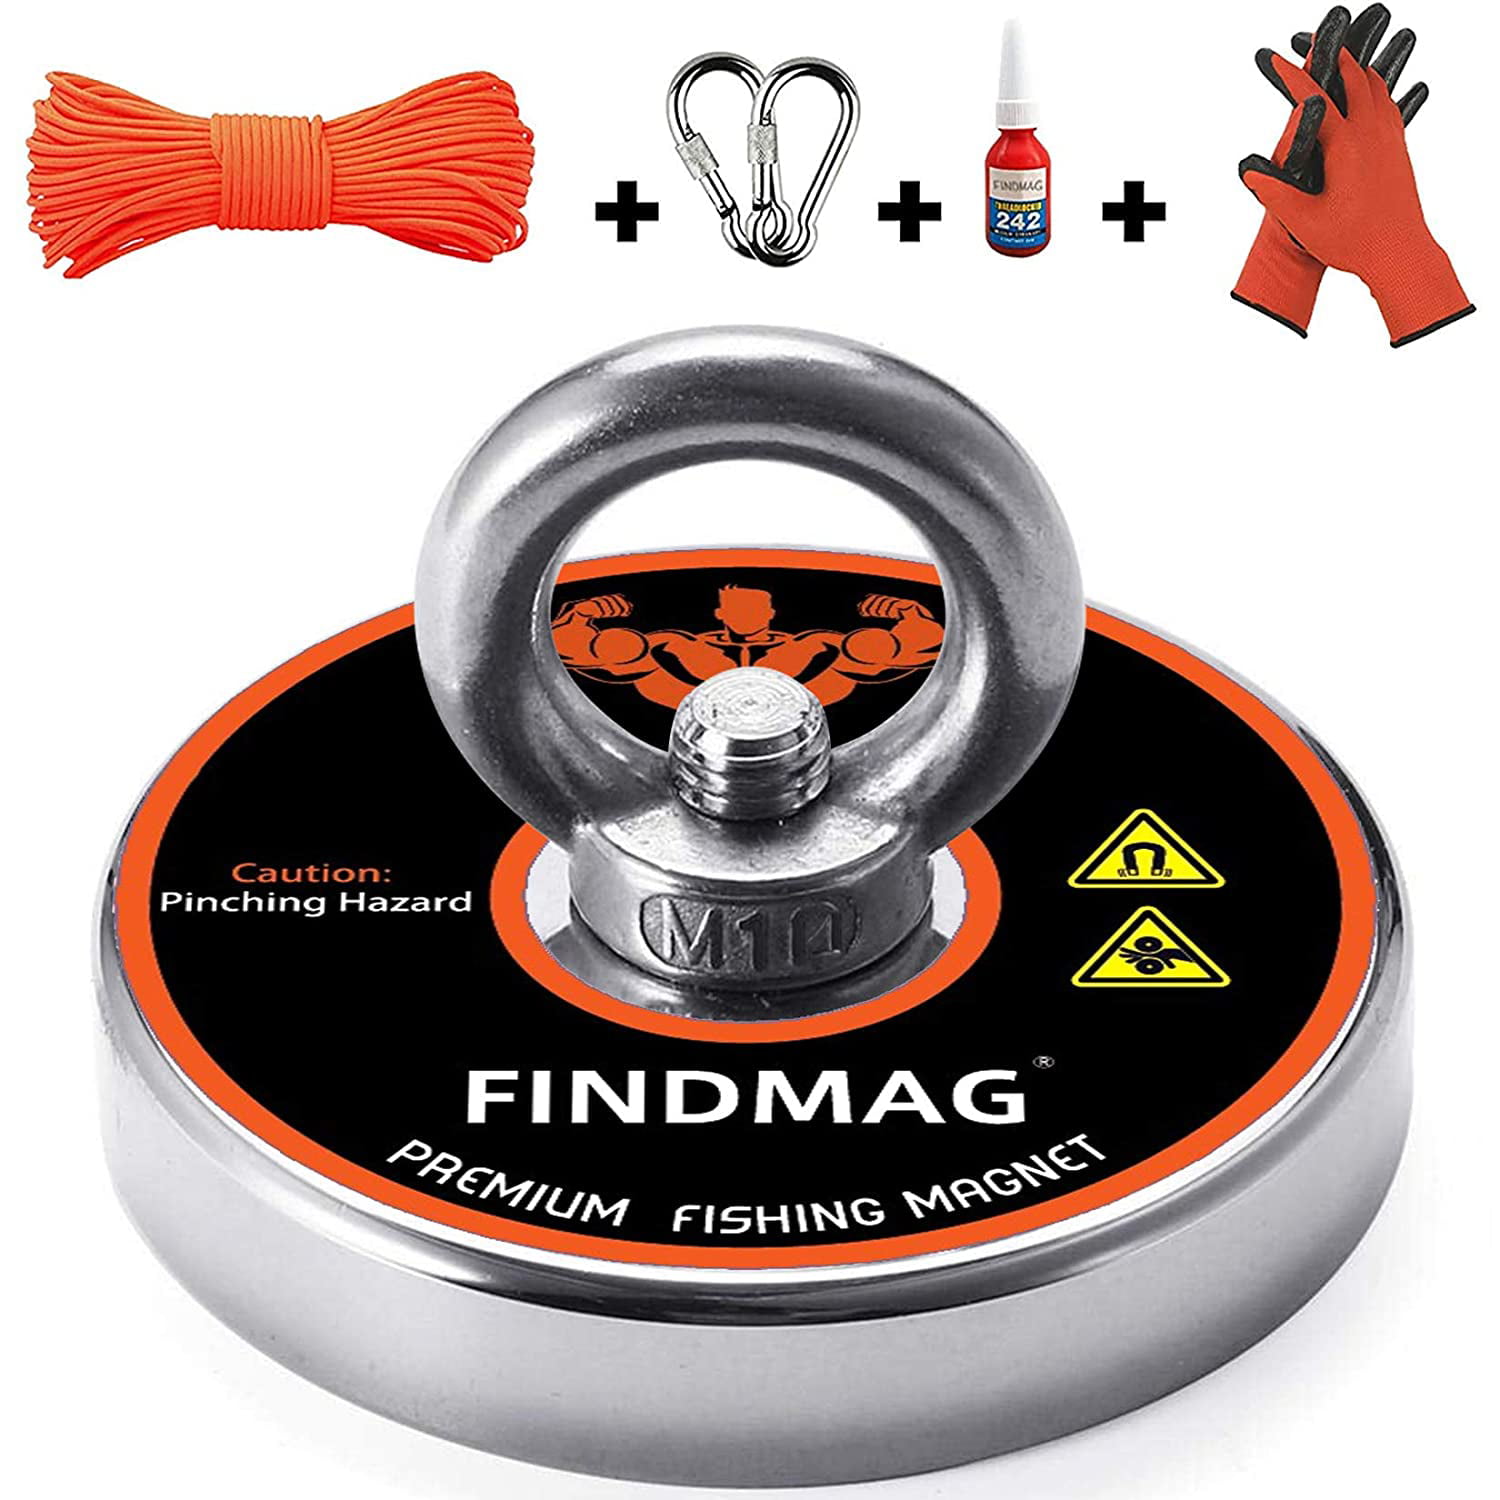 Ant Mag Fishing Magnet Heavy Duty Large Magnet with Eyebolt Super Powerful Magnetic Fishing with Yellow Coating and Black Layer Retrieving Magnet for Rivers D75